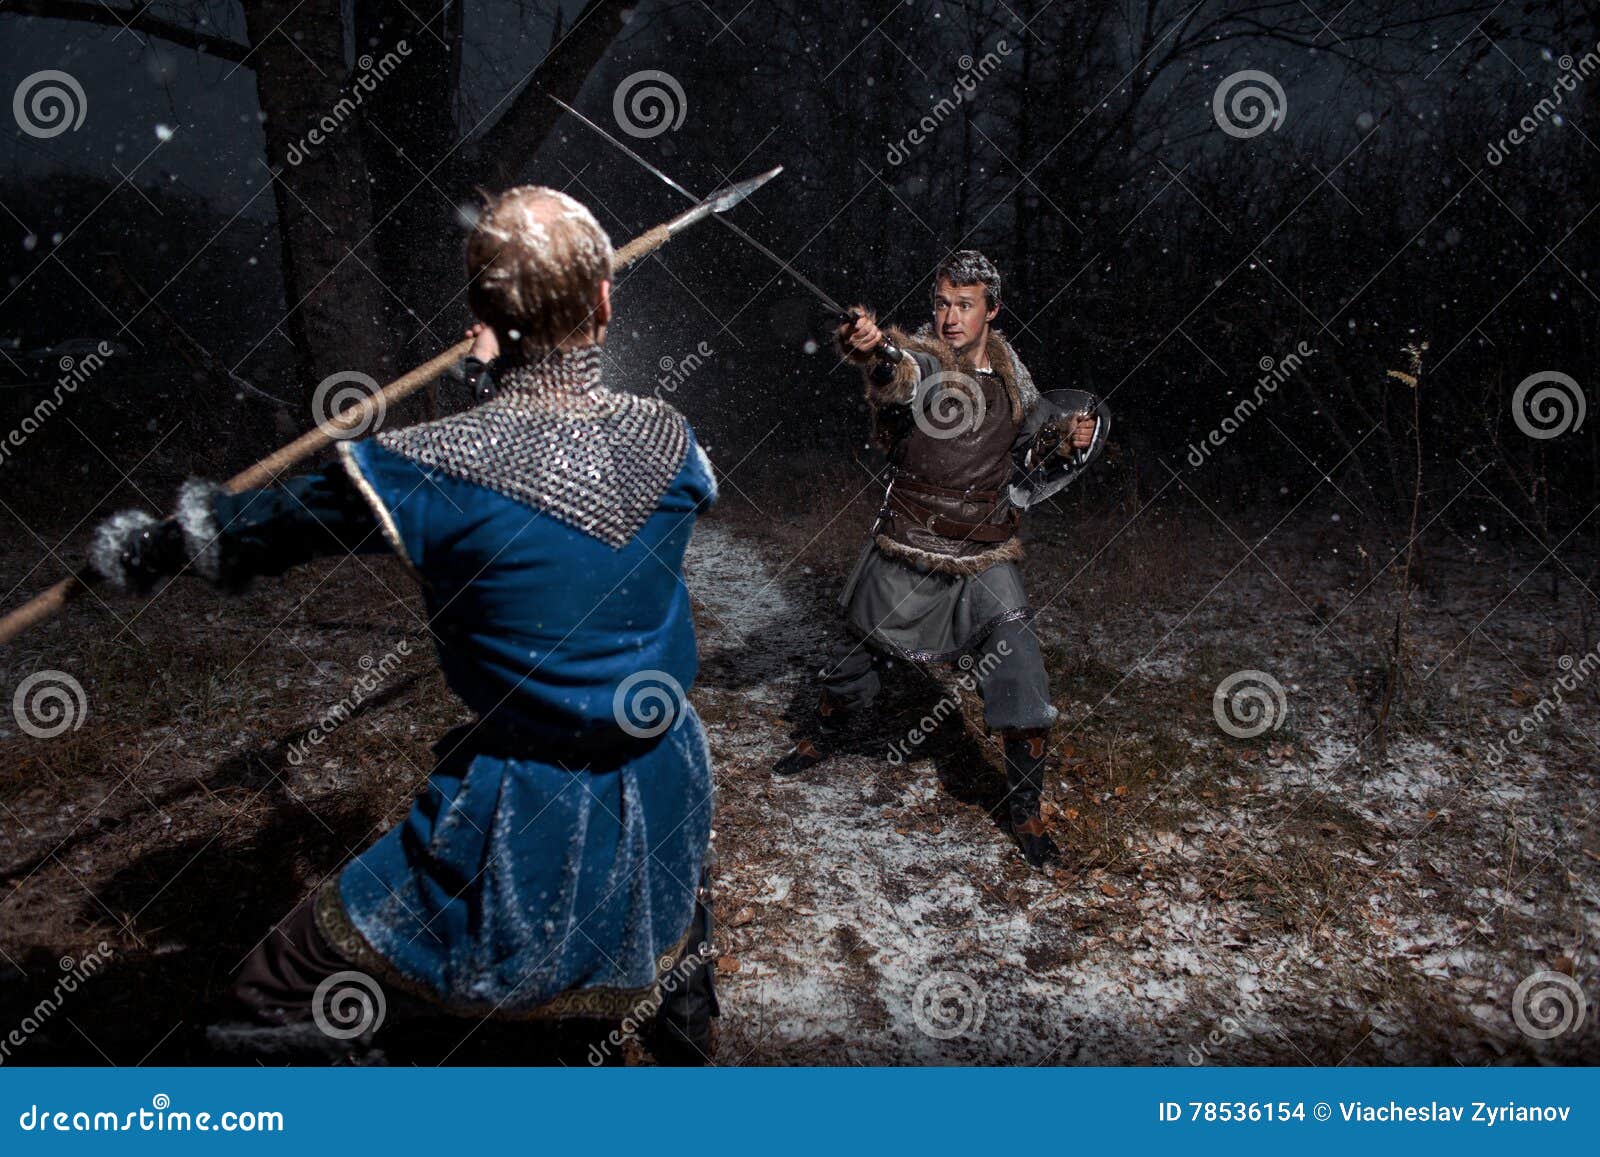 the battle between medieval knights in the style of game of thrones in winter forest landscapes. spear against sword